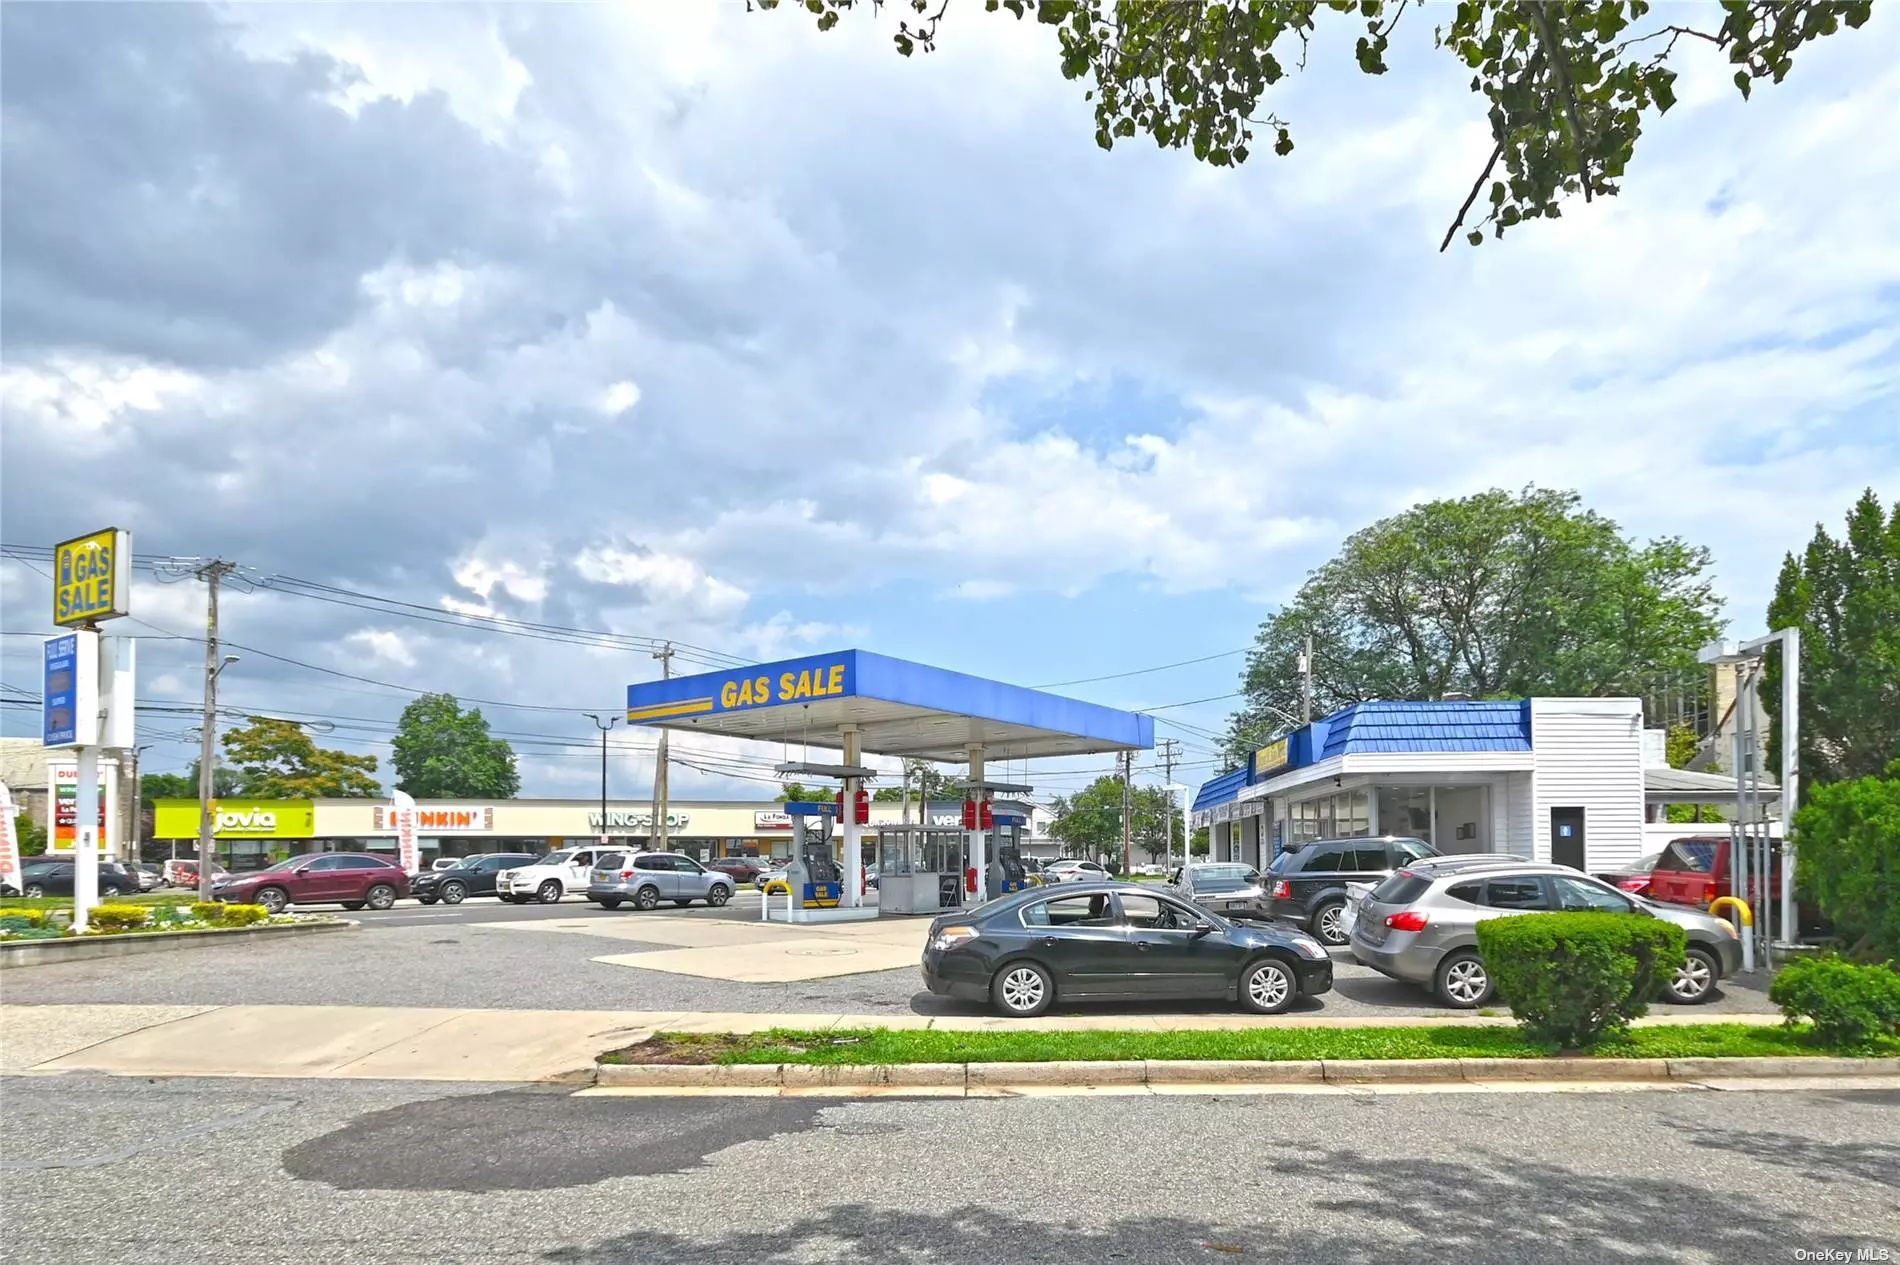 A corner gas station and repair shop on a prime well-traveled road situated at the corner of Front Street (a major thoroughfare on LI) in Hempstead. Gas Station is open from 6 am to 10 pm / 7 days per week. The station has new 4 gasoline pumps, upgraded overhang canopy pumps, and tanks. The gas tank capacity goes up to 21, 000. Both self-serve and full-service gas station pumps. Brand new suppression system. The repair shop has 3 brand-new above-ground bays. There are two offices- one as a front office with a waiting room and one private office. Full proof security in the offices. The basement has 2 bathrooms and storage space. Financials are available upon request.